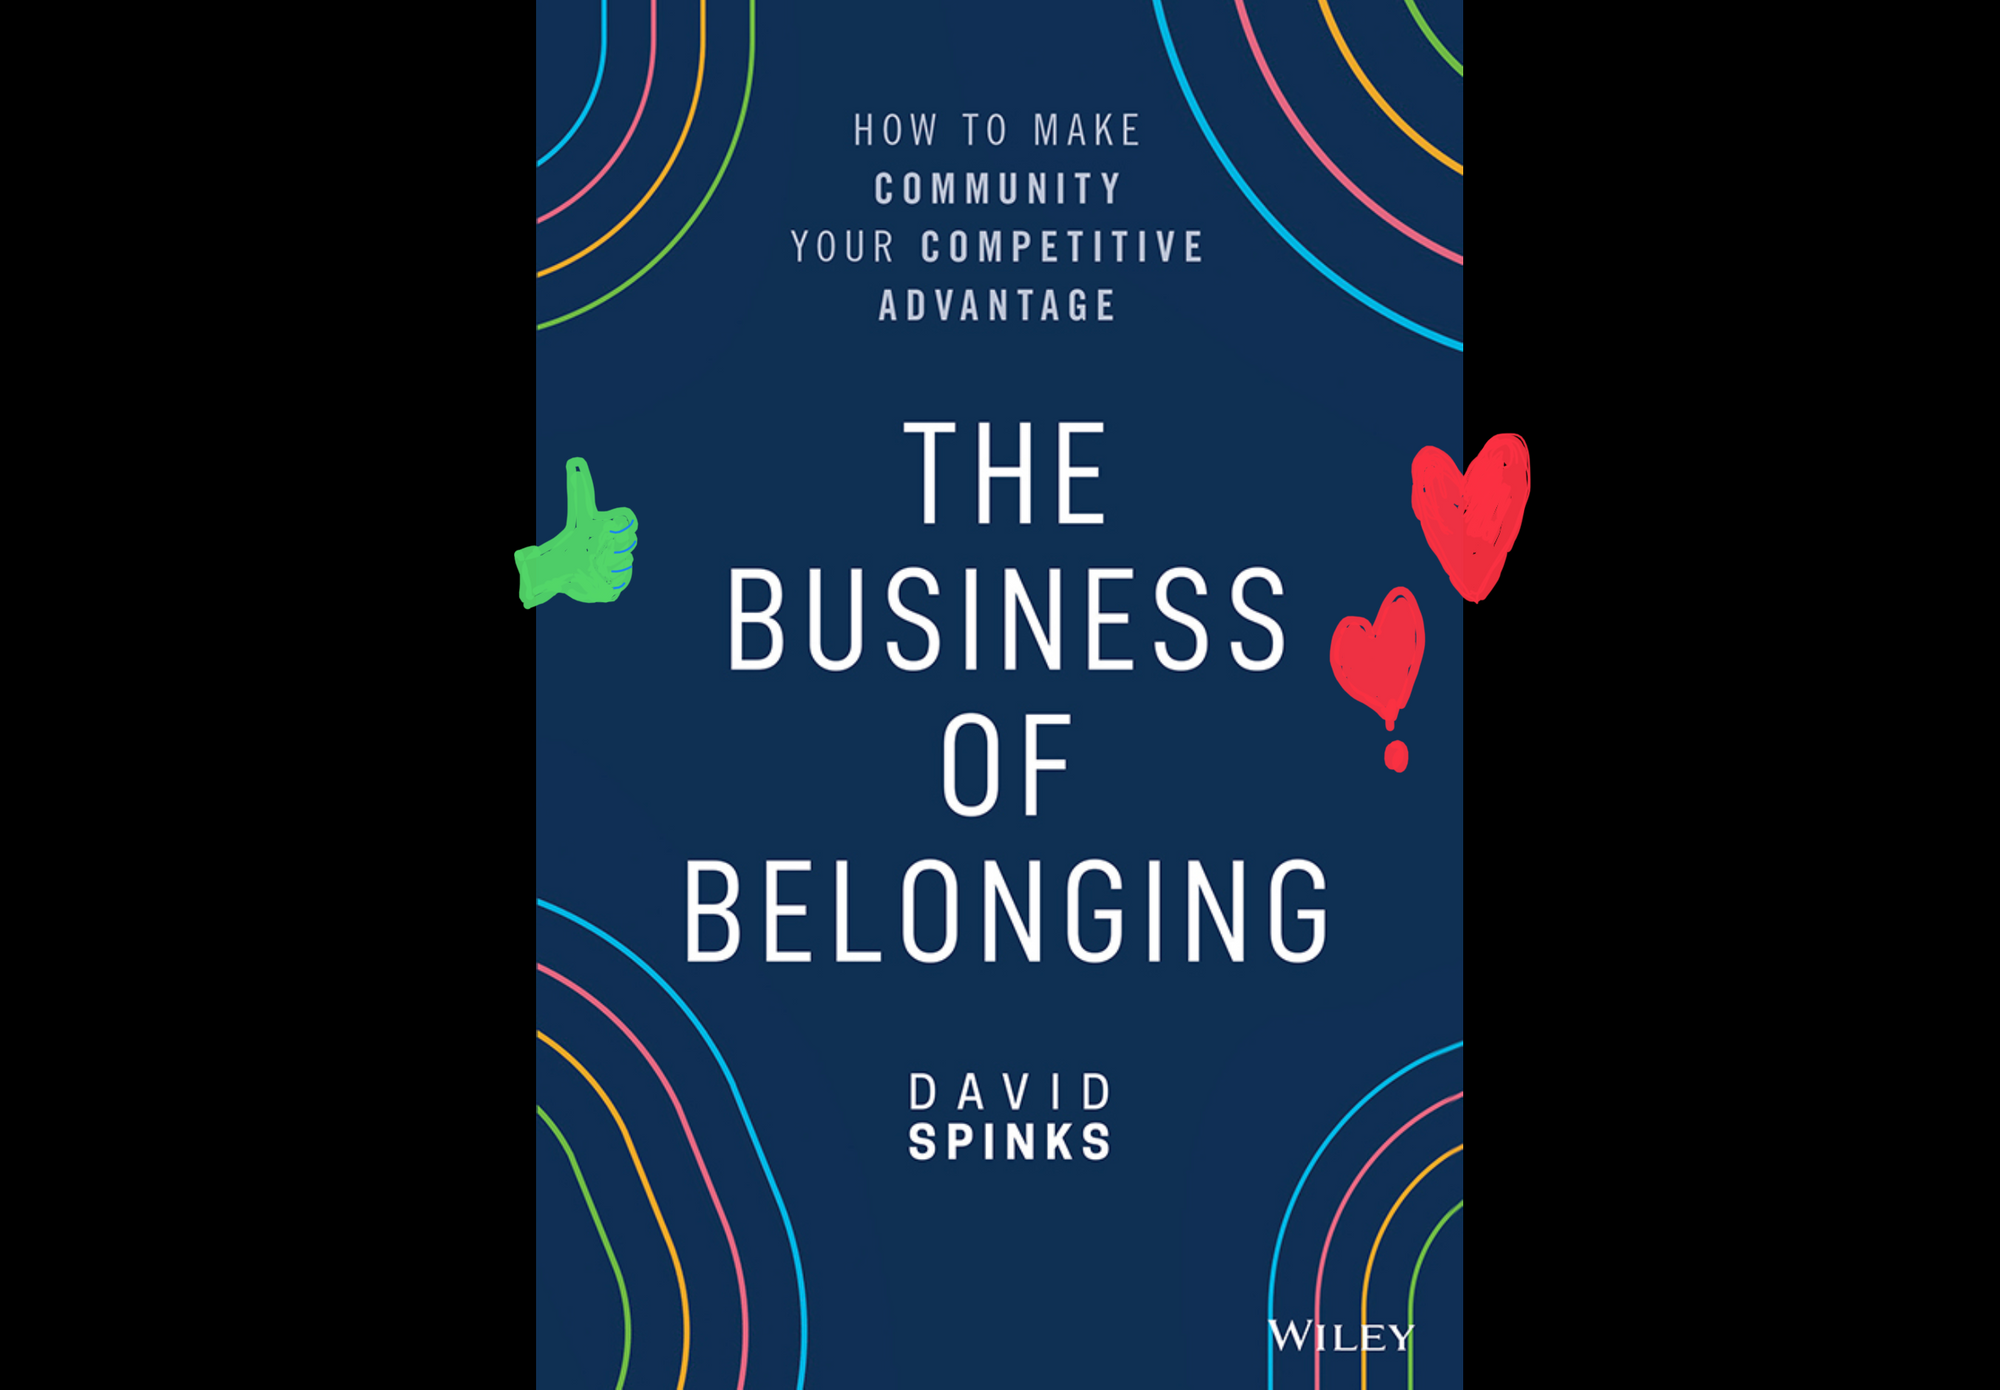 15 key community-building takeaways from the book: Business of Belonging by David Spinks